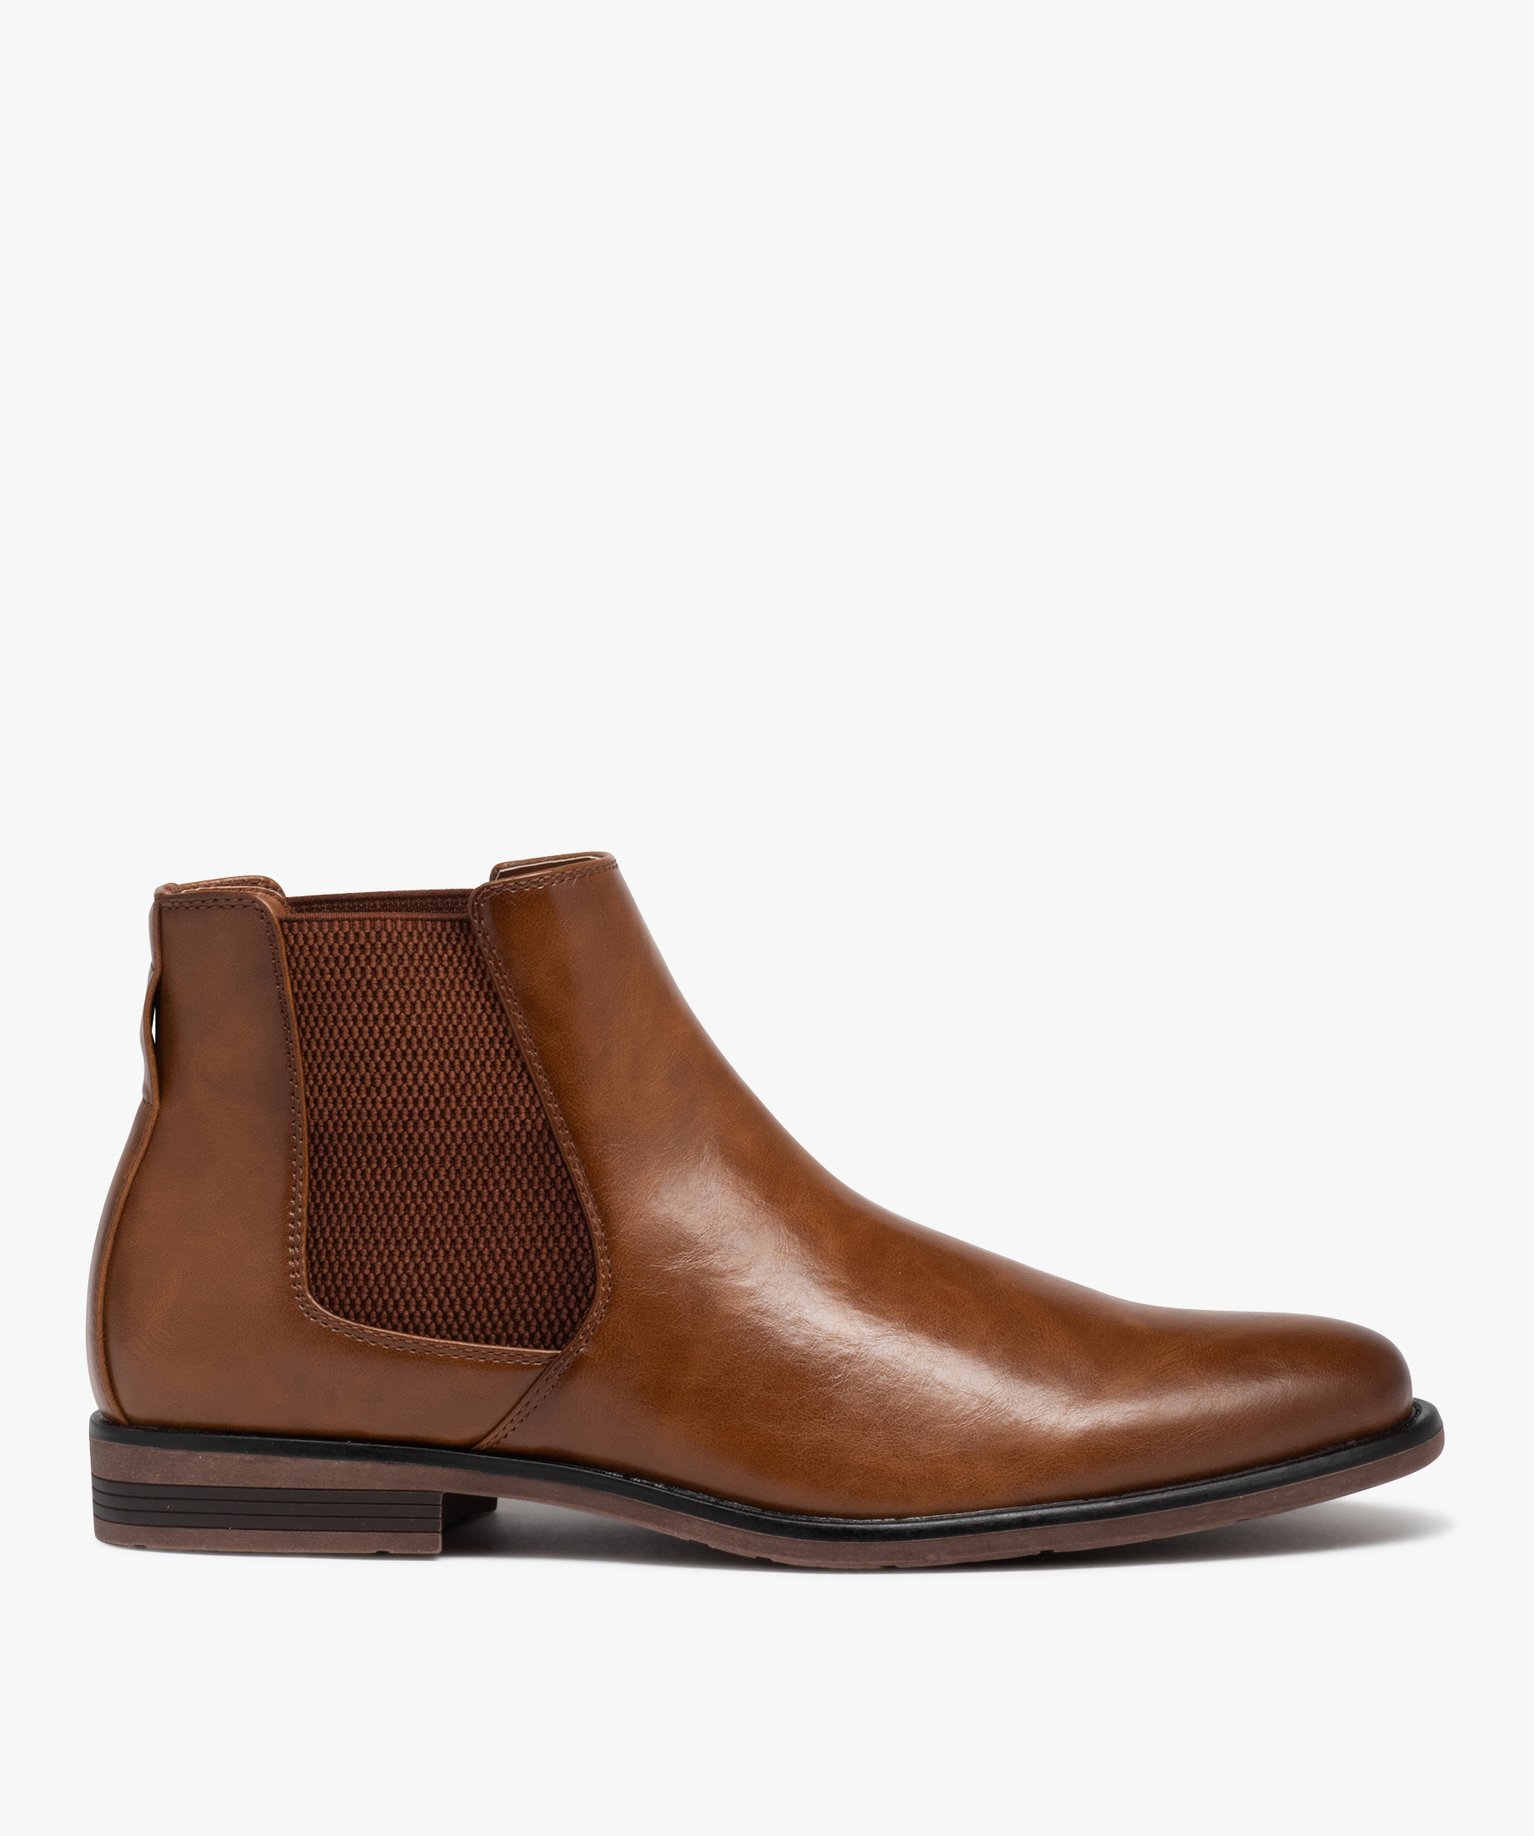 boots homme unies style chelsea brun